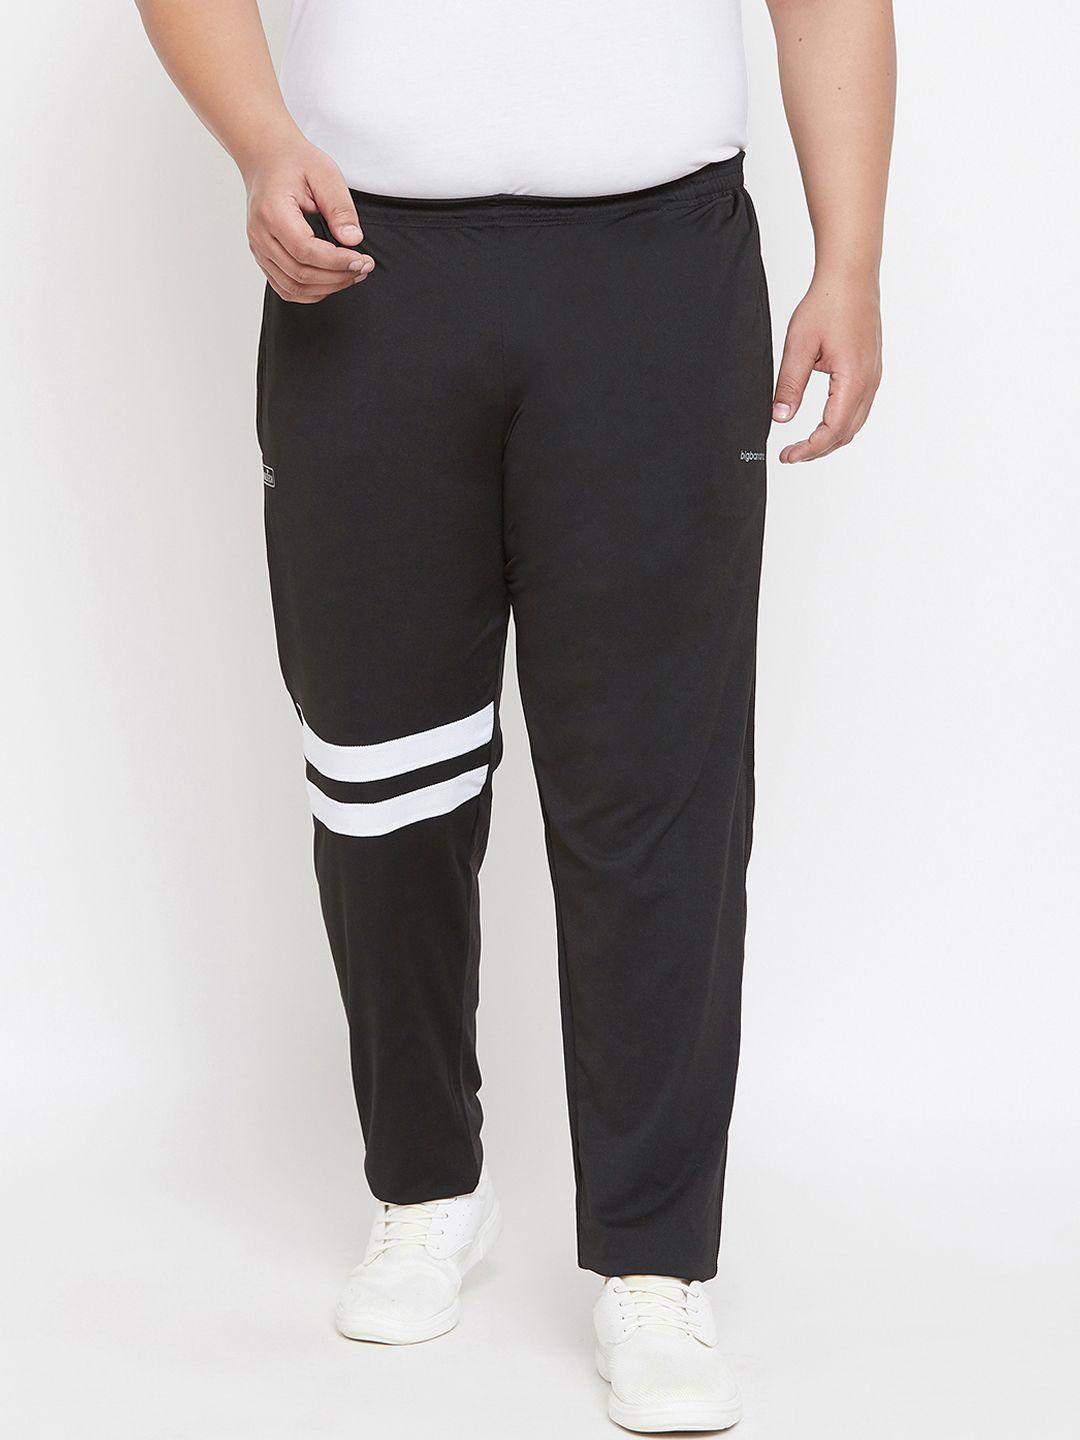 bigbanana-plus-size-men-black-solid-antimicrobial-straight-fit-track-pants